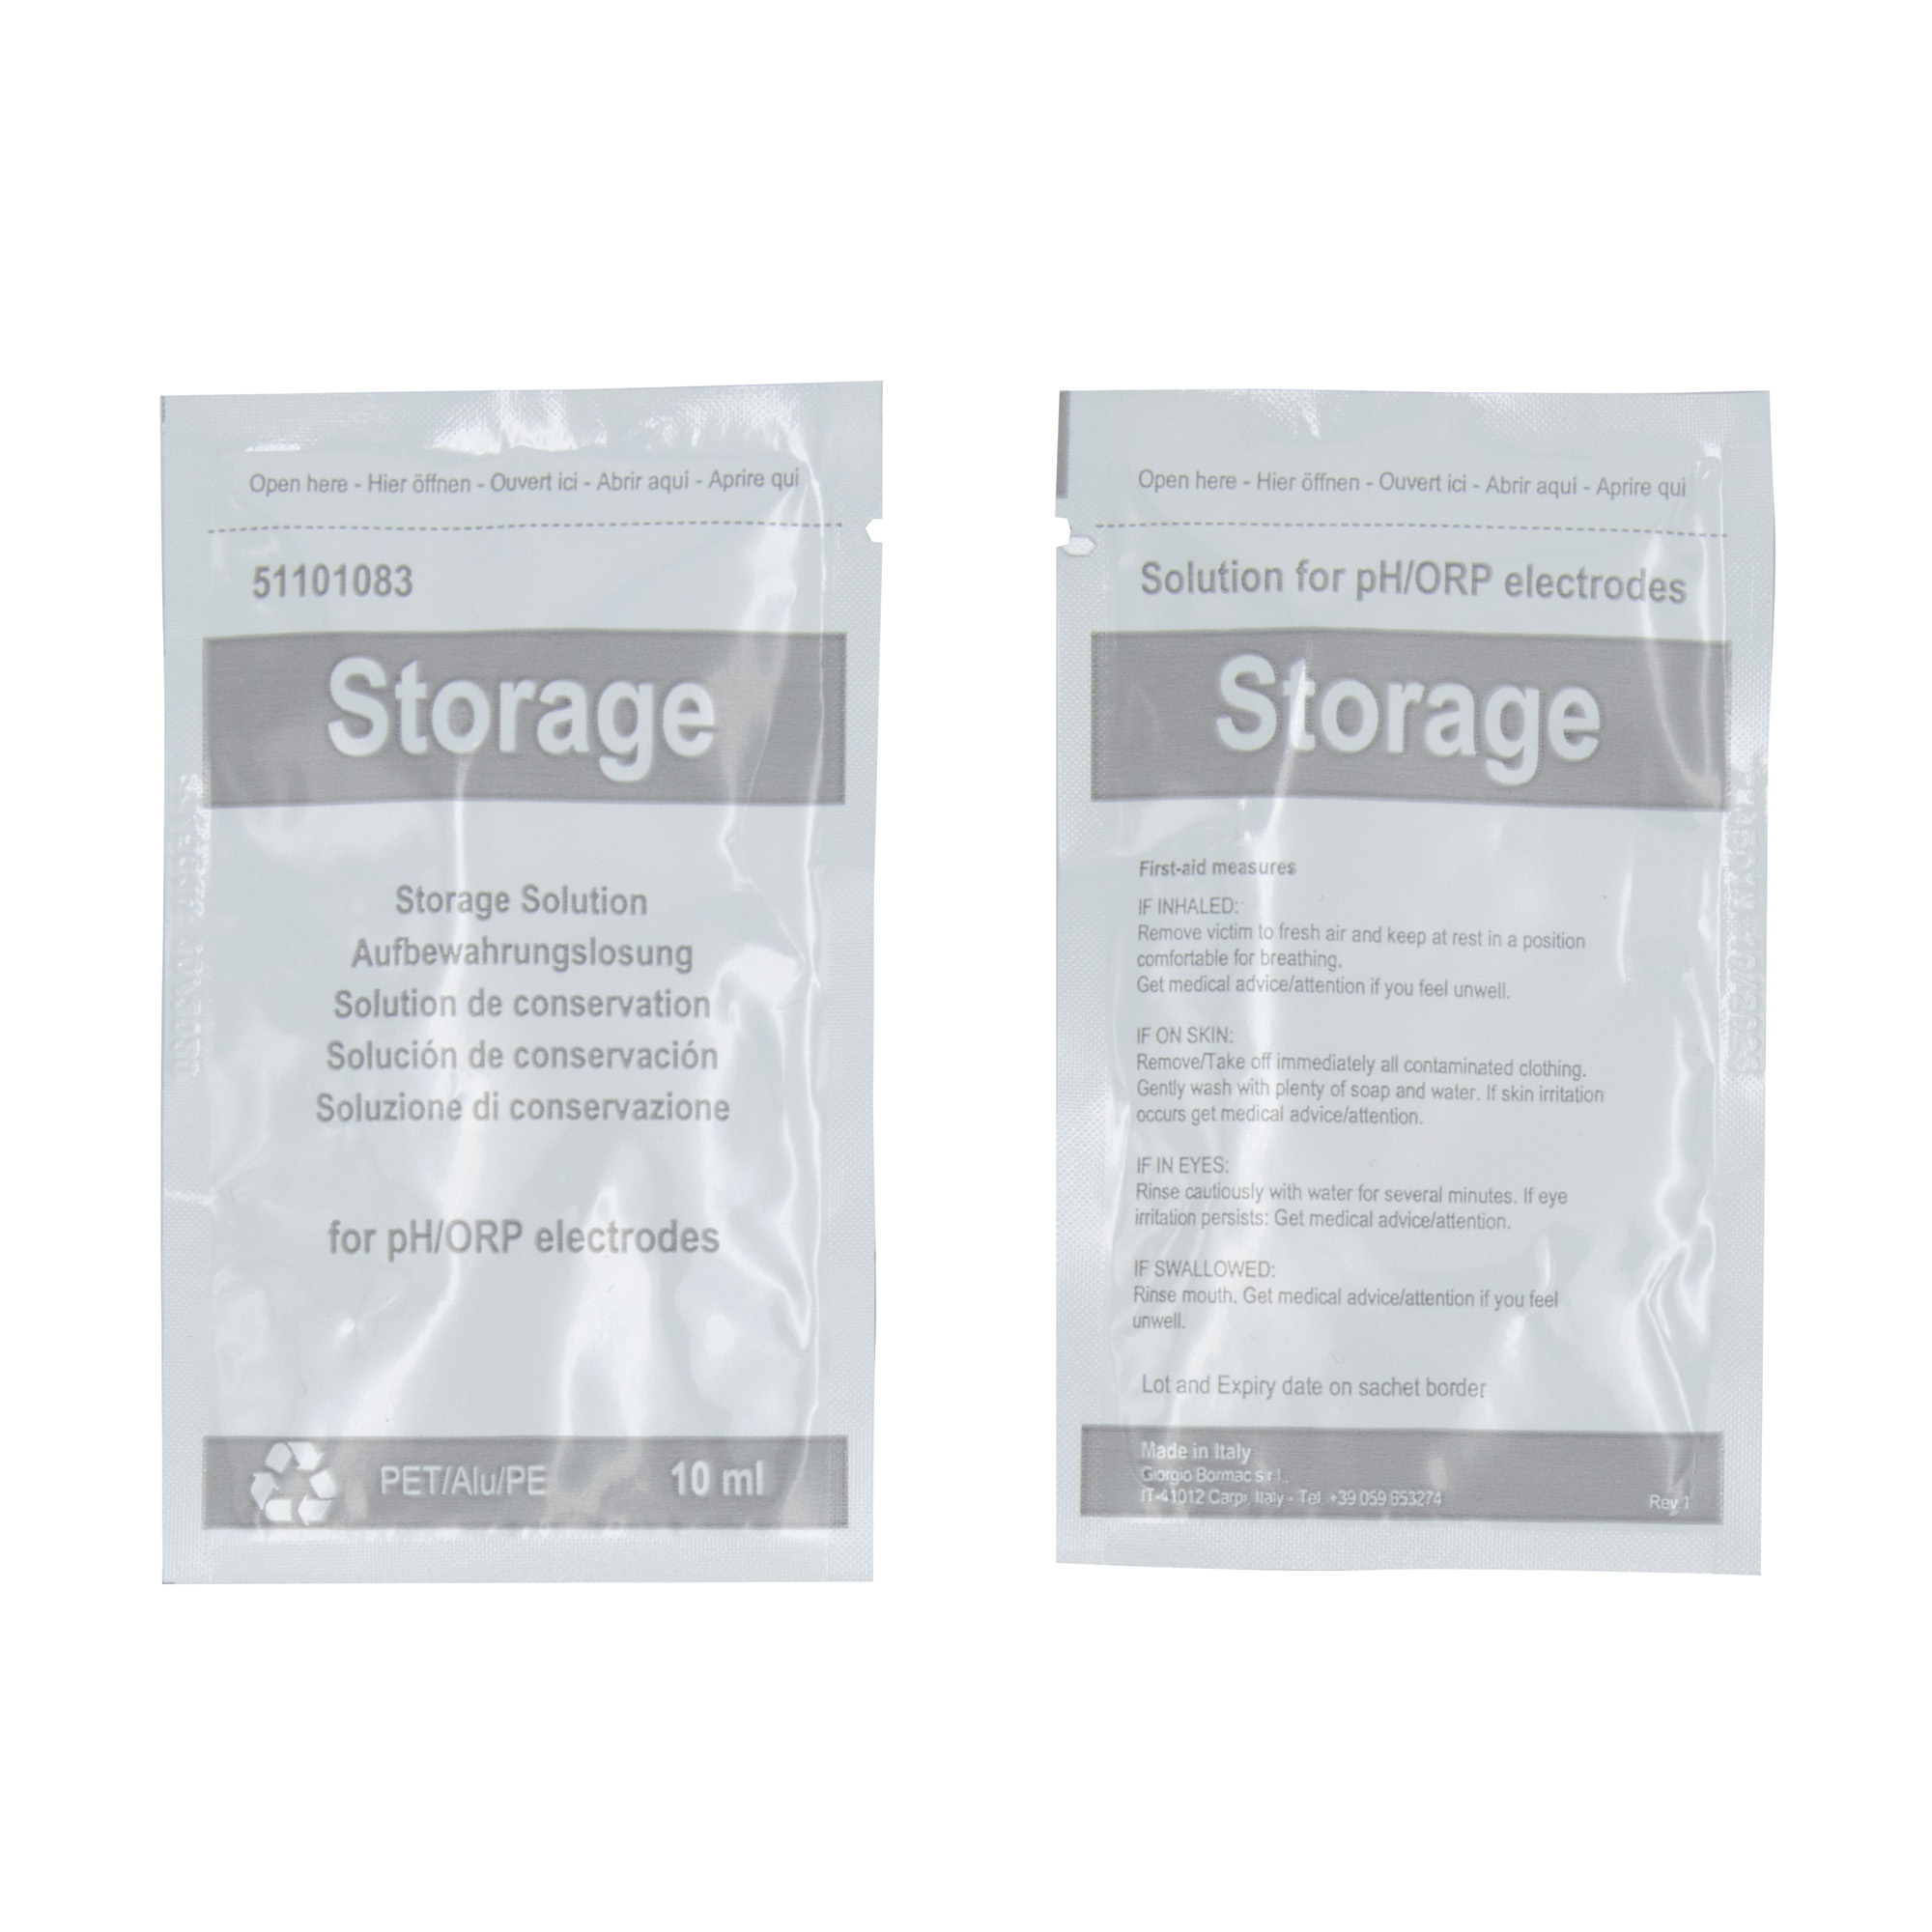 XS BASIC storage solution pack with 20 sachets of 10ml each